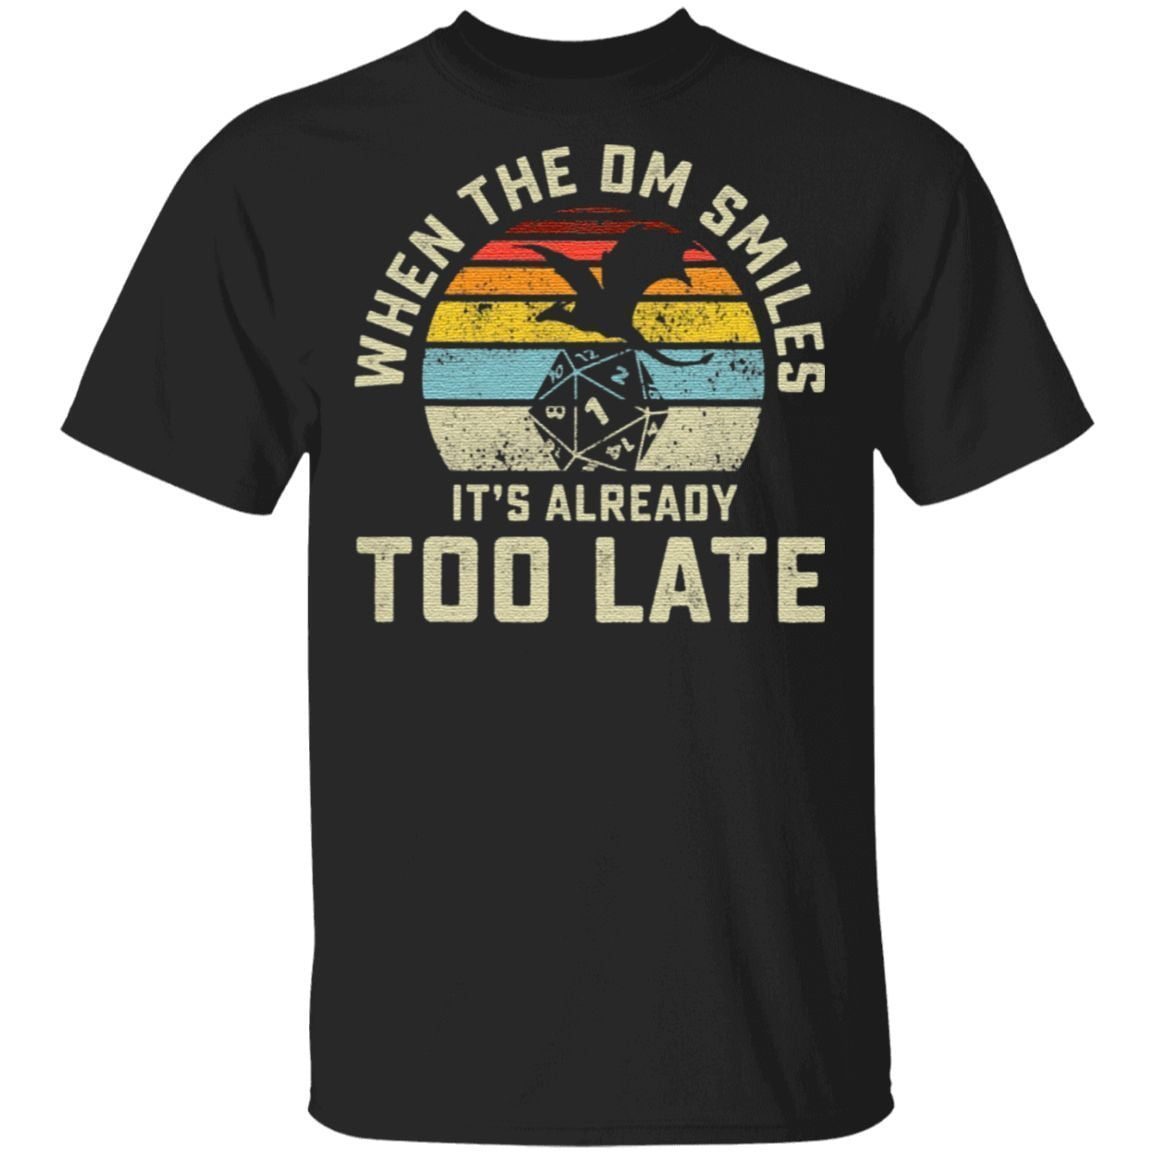 When The DM Smiles It’s Already Too Late TShirt